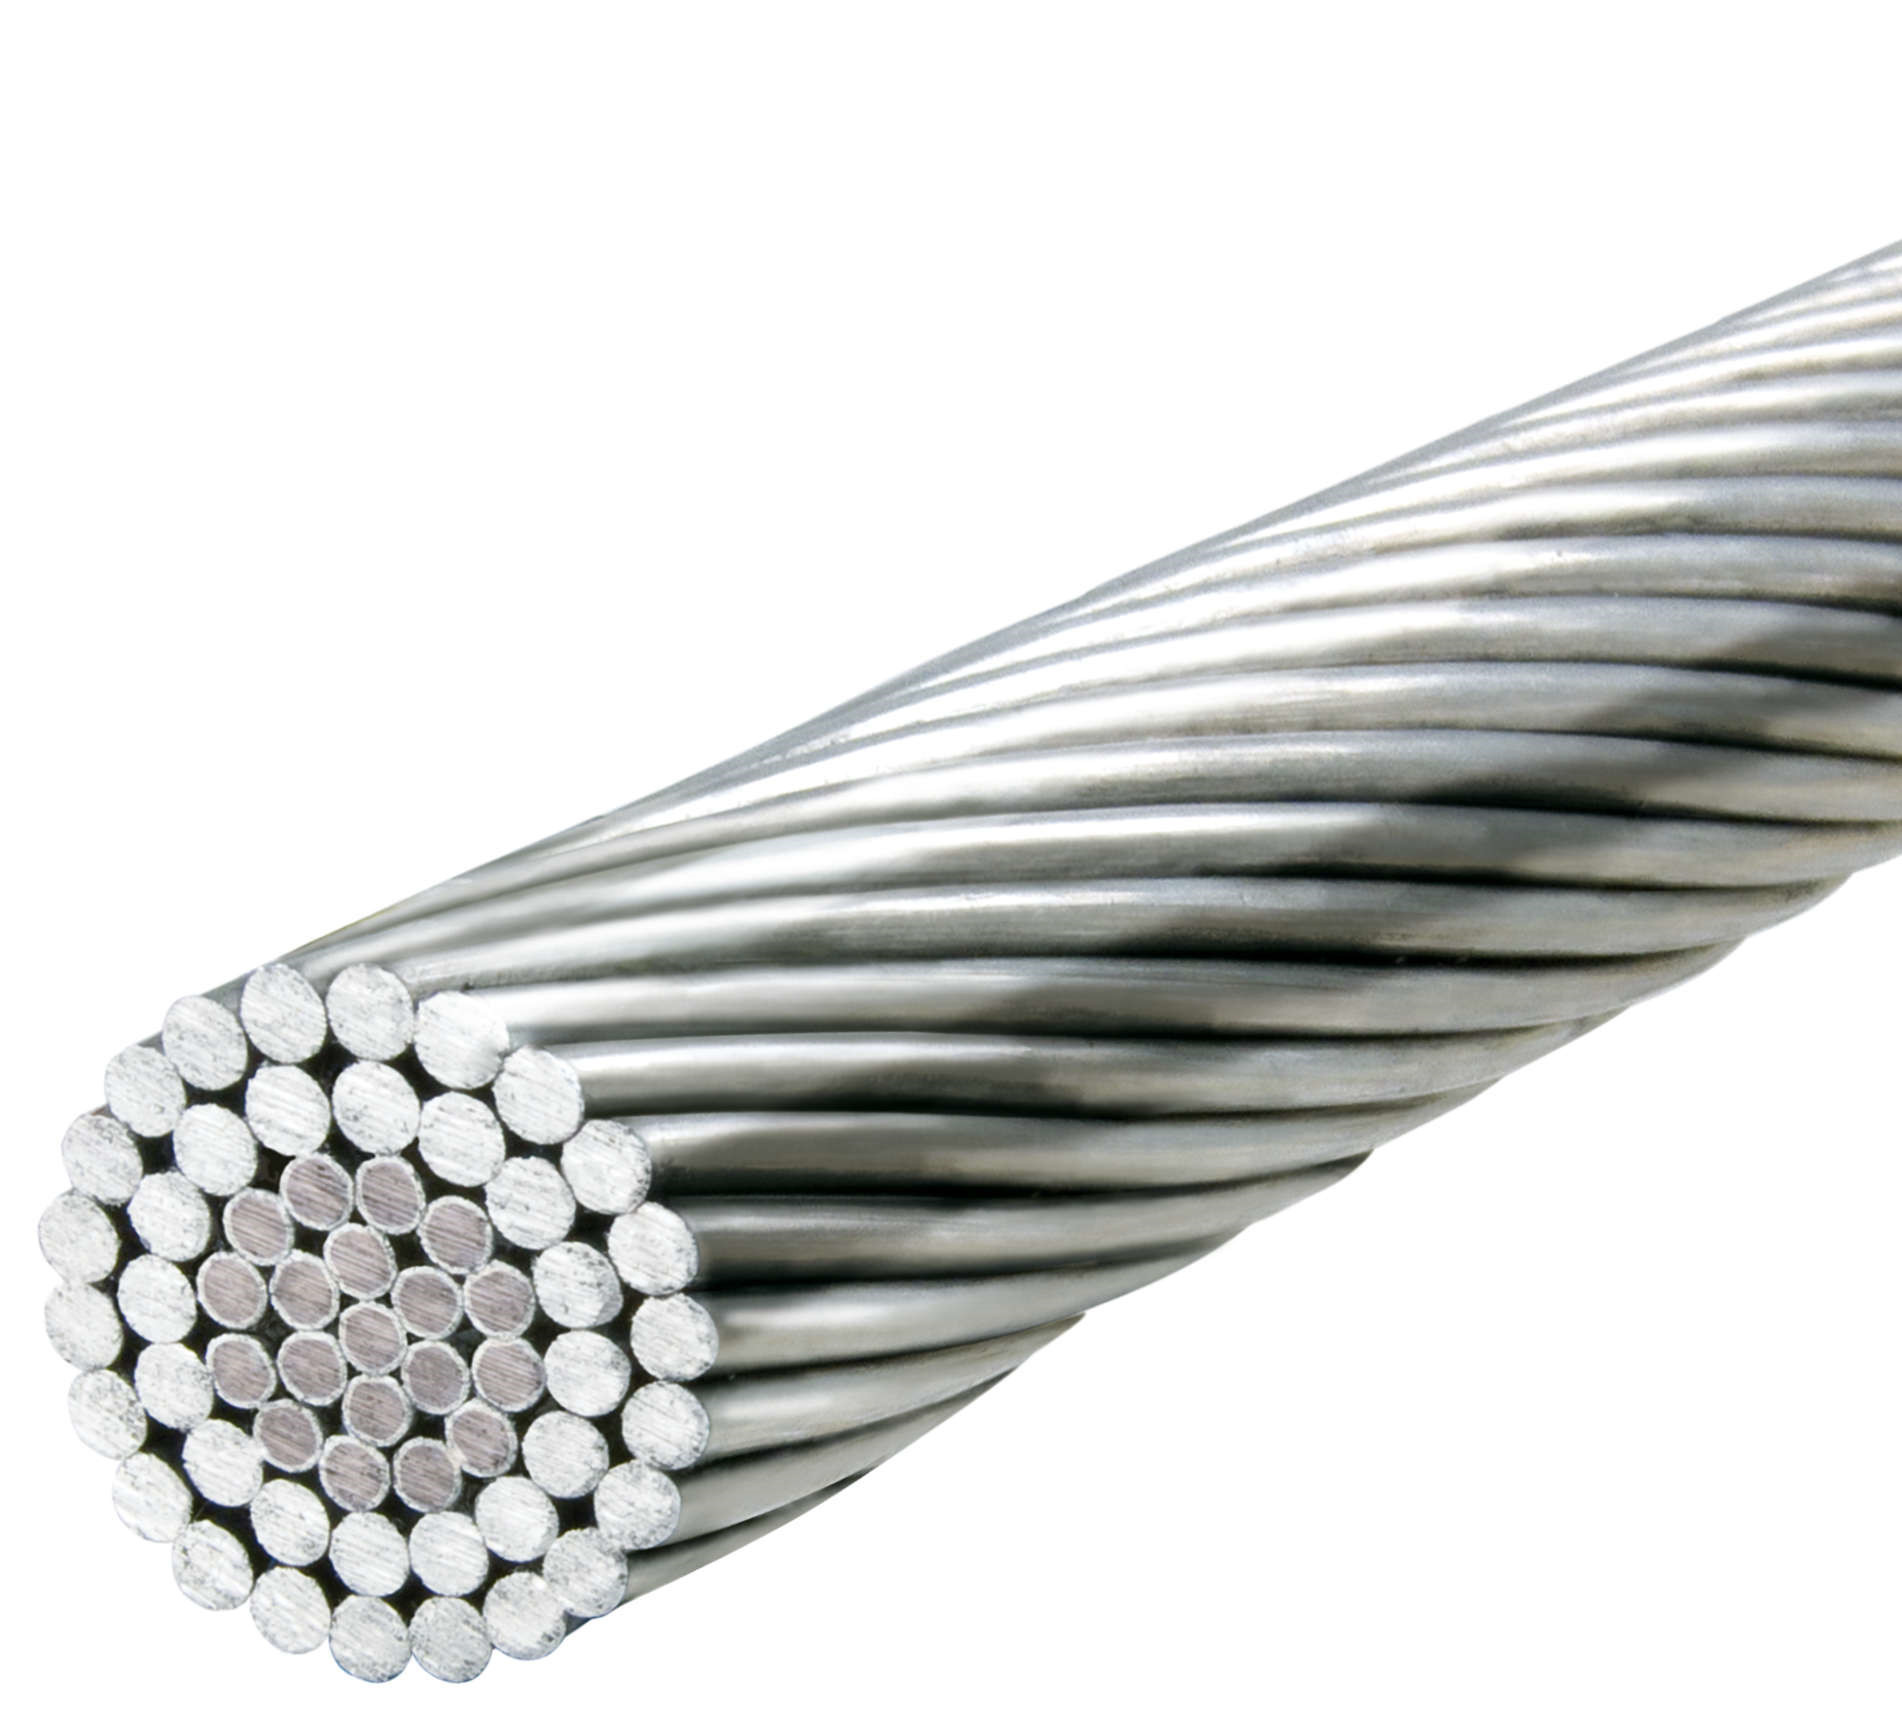 Wholesale Bare cable manufacturer ACSR BS215 moose conductor with price from china suppliers